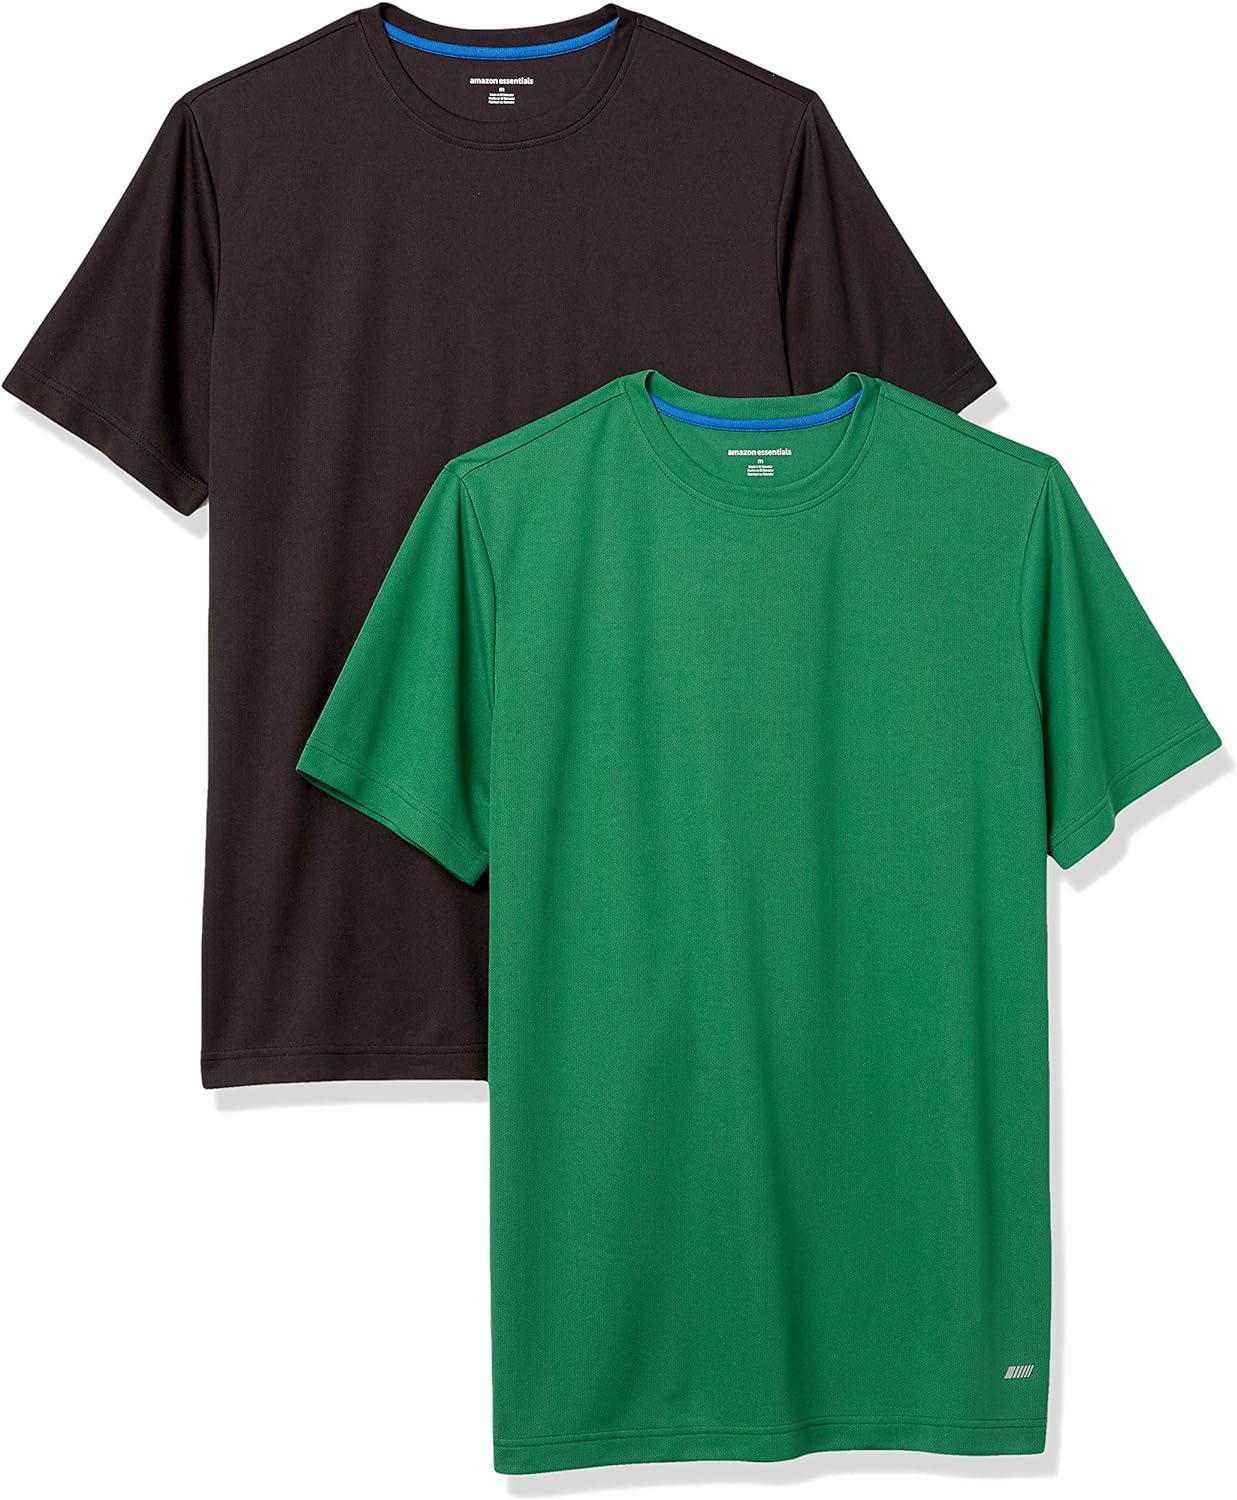 Amazon Essentials Men’s Active Performance Tech T-Shirt (Available in Big & Tall), Pack of 2